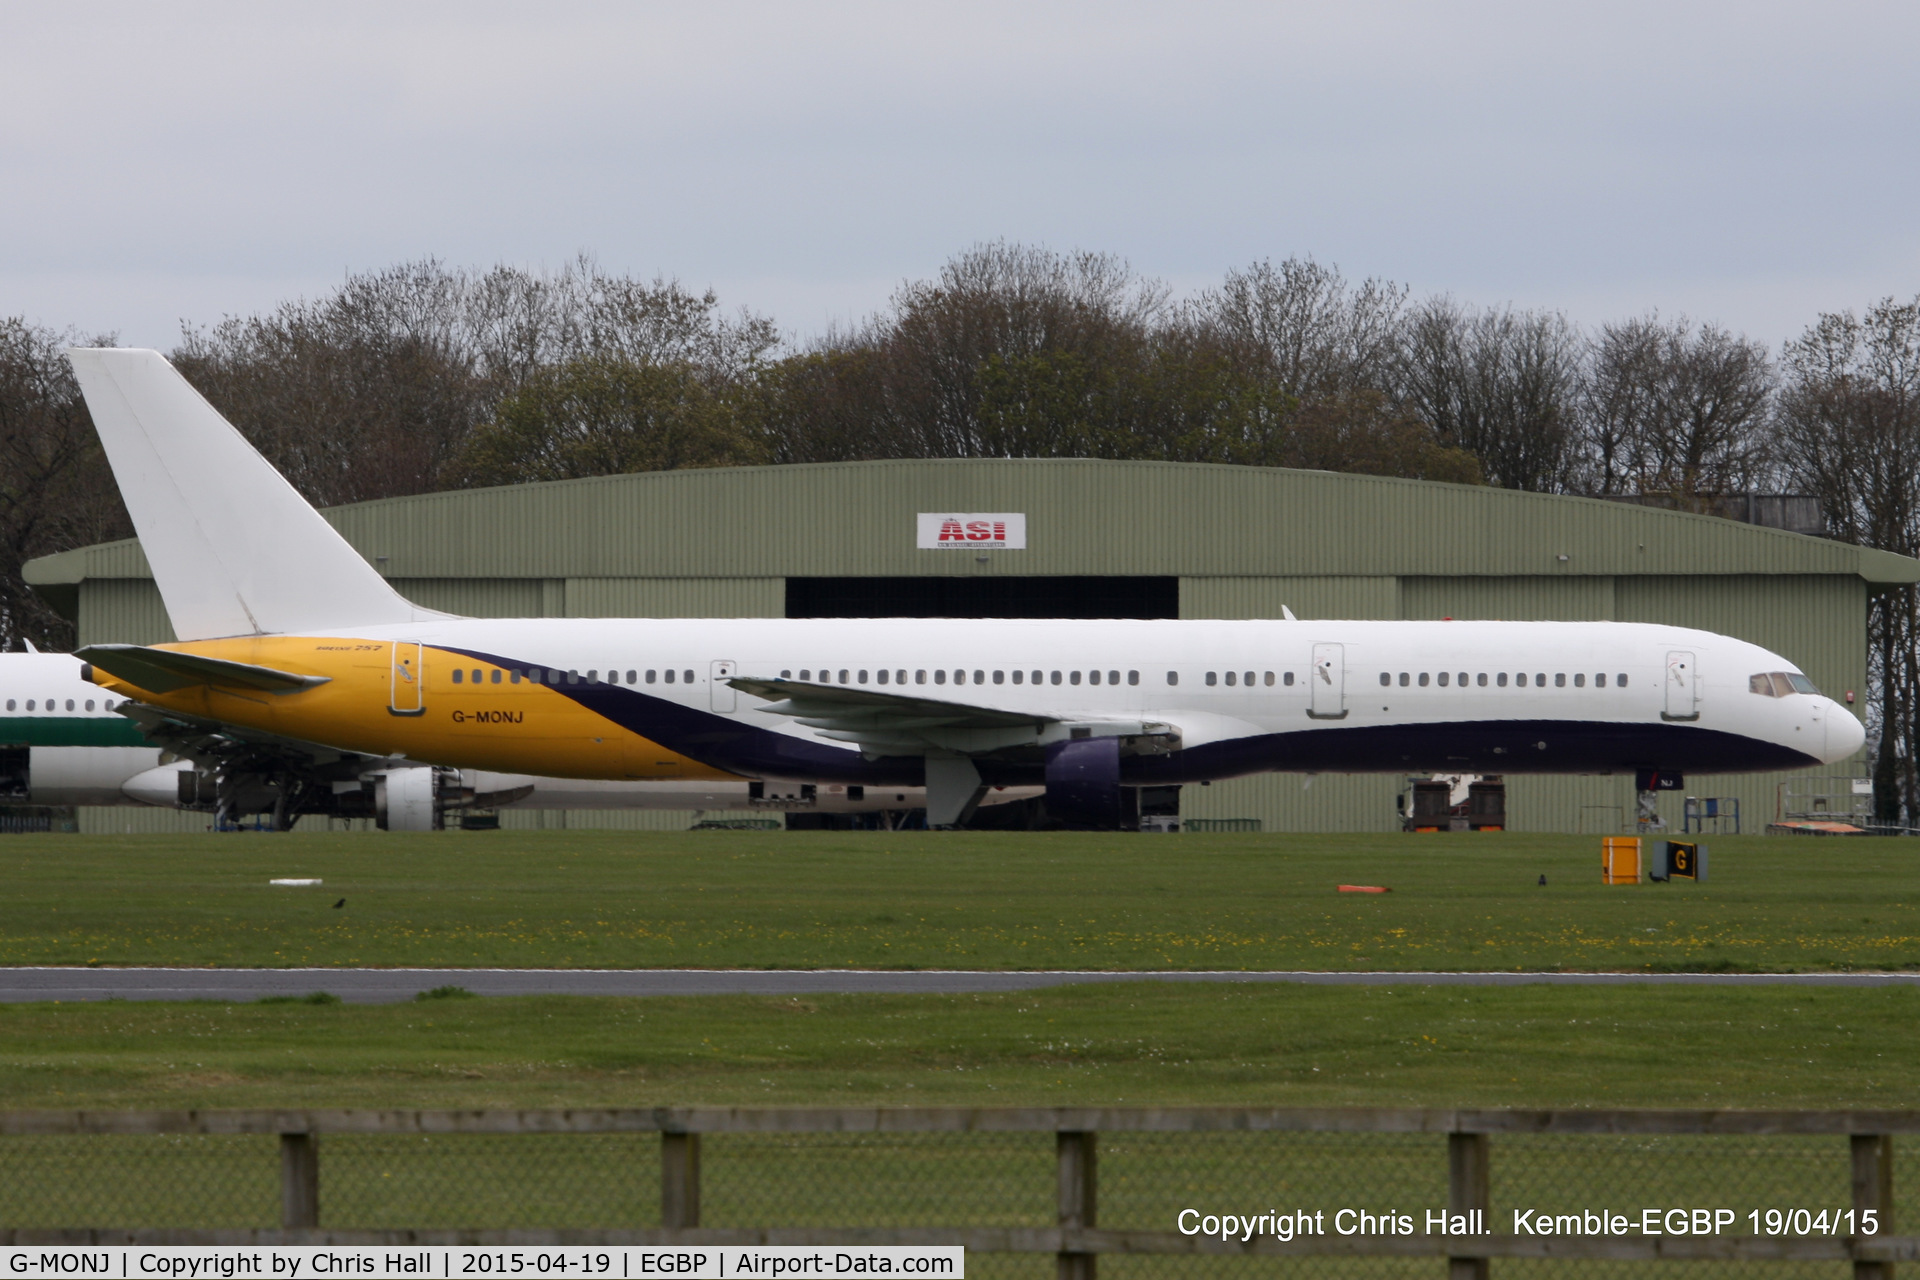 G-MONJ, 1988 Boeing 757-2T7 C/N 24104, ex Monarch, being scrapped at Kemble